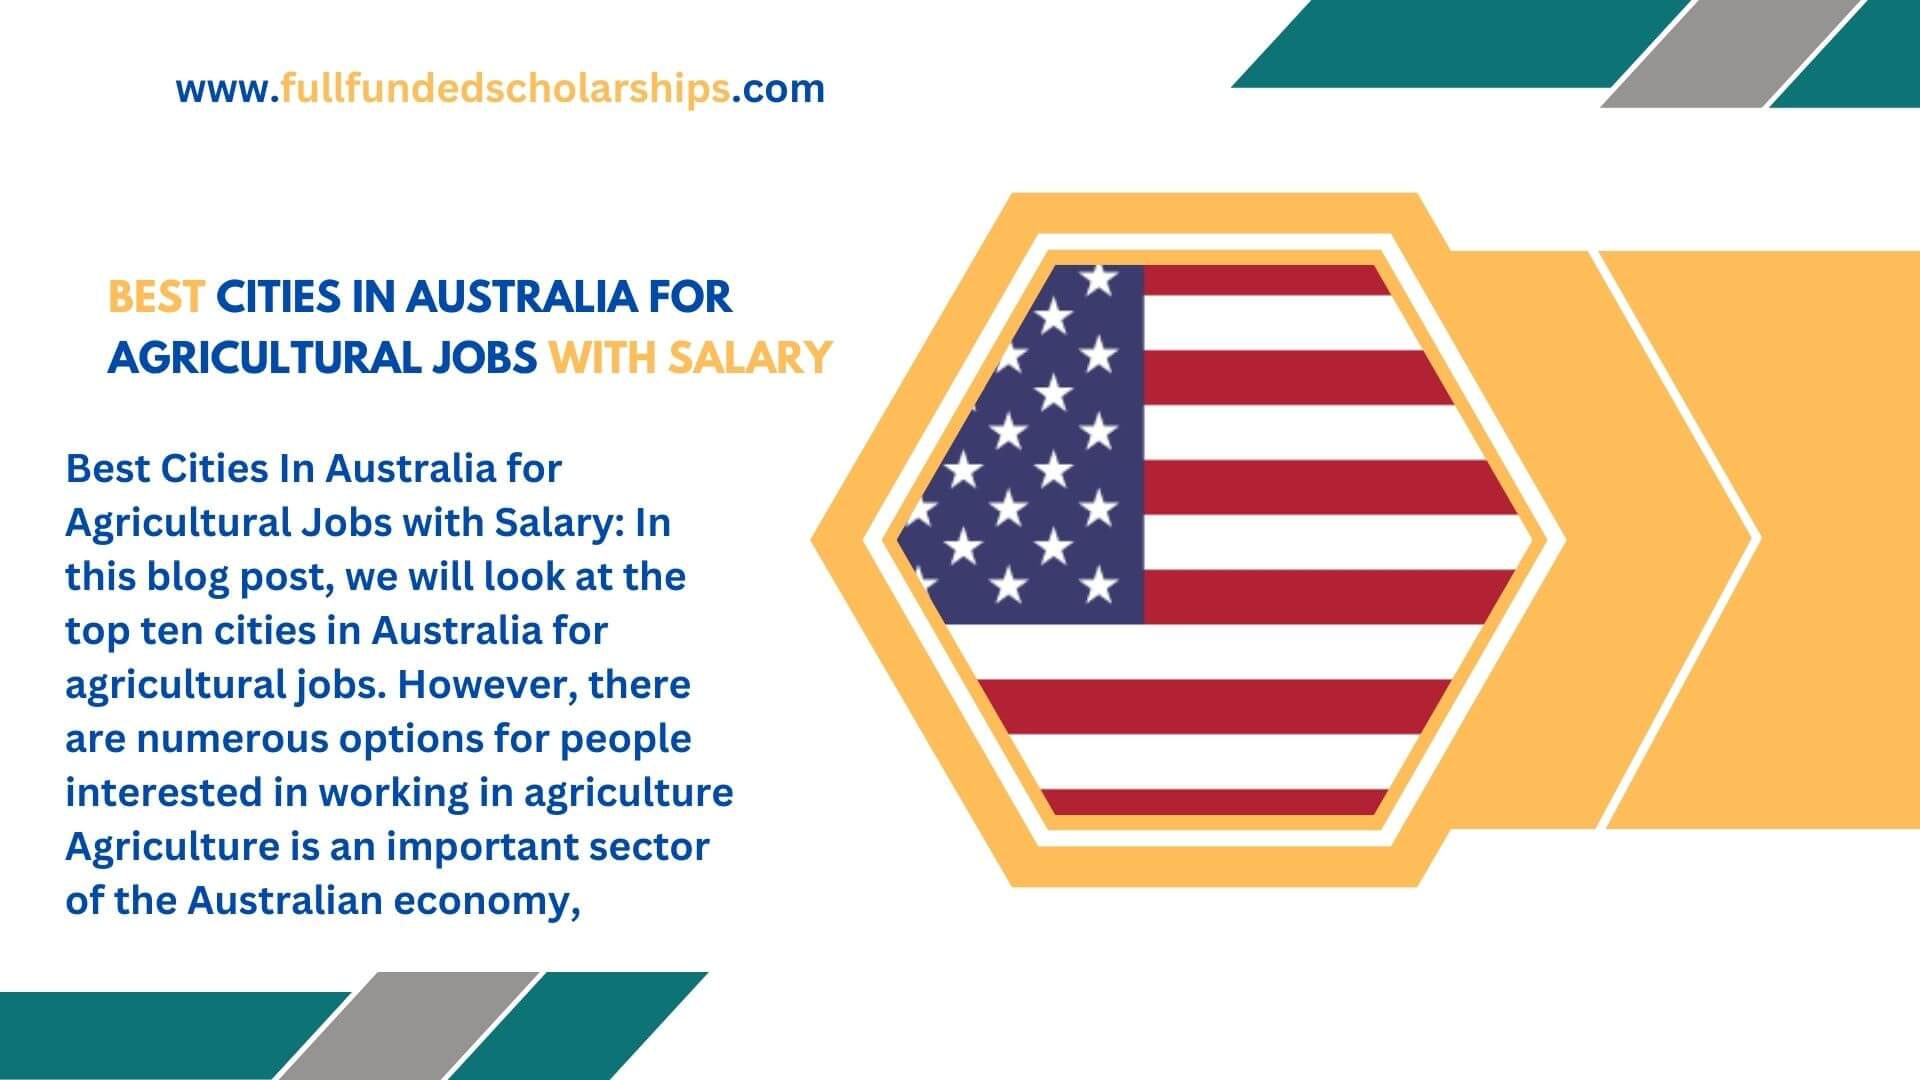 Best Cities In Australia for Agricultural Jobs with Salary